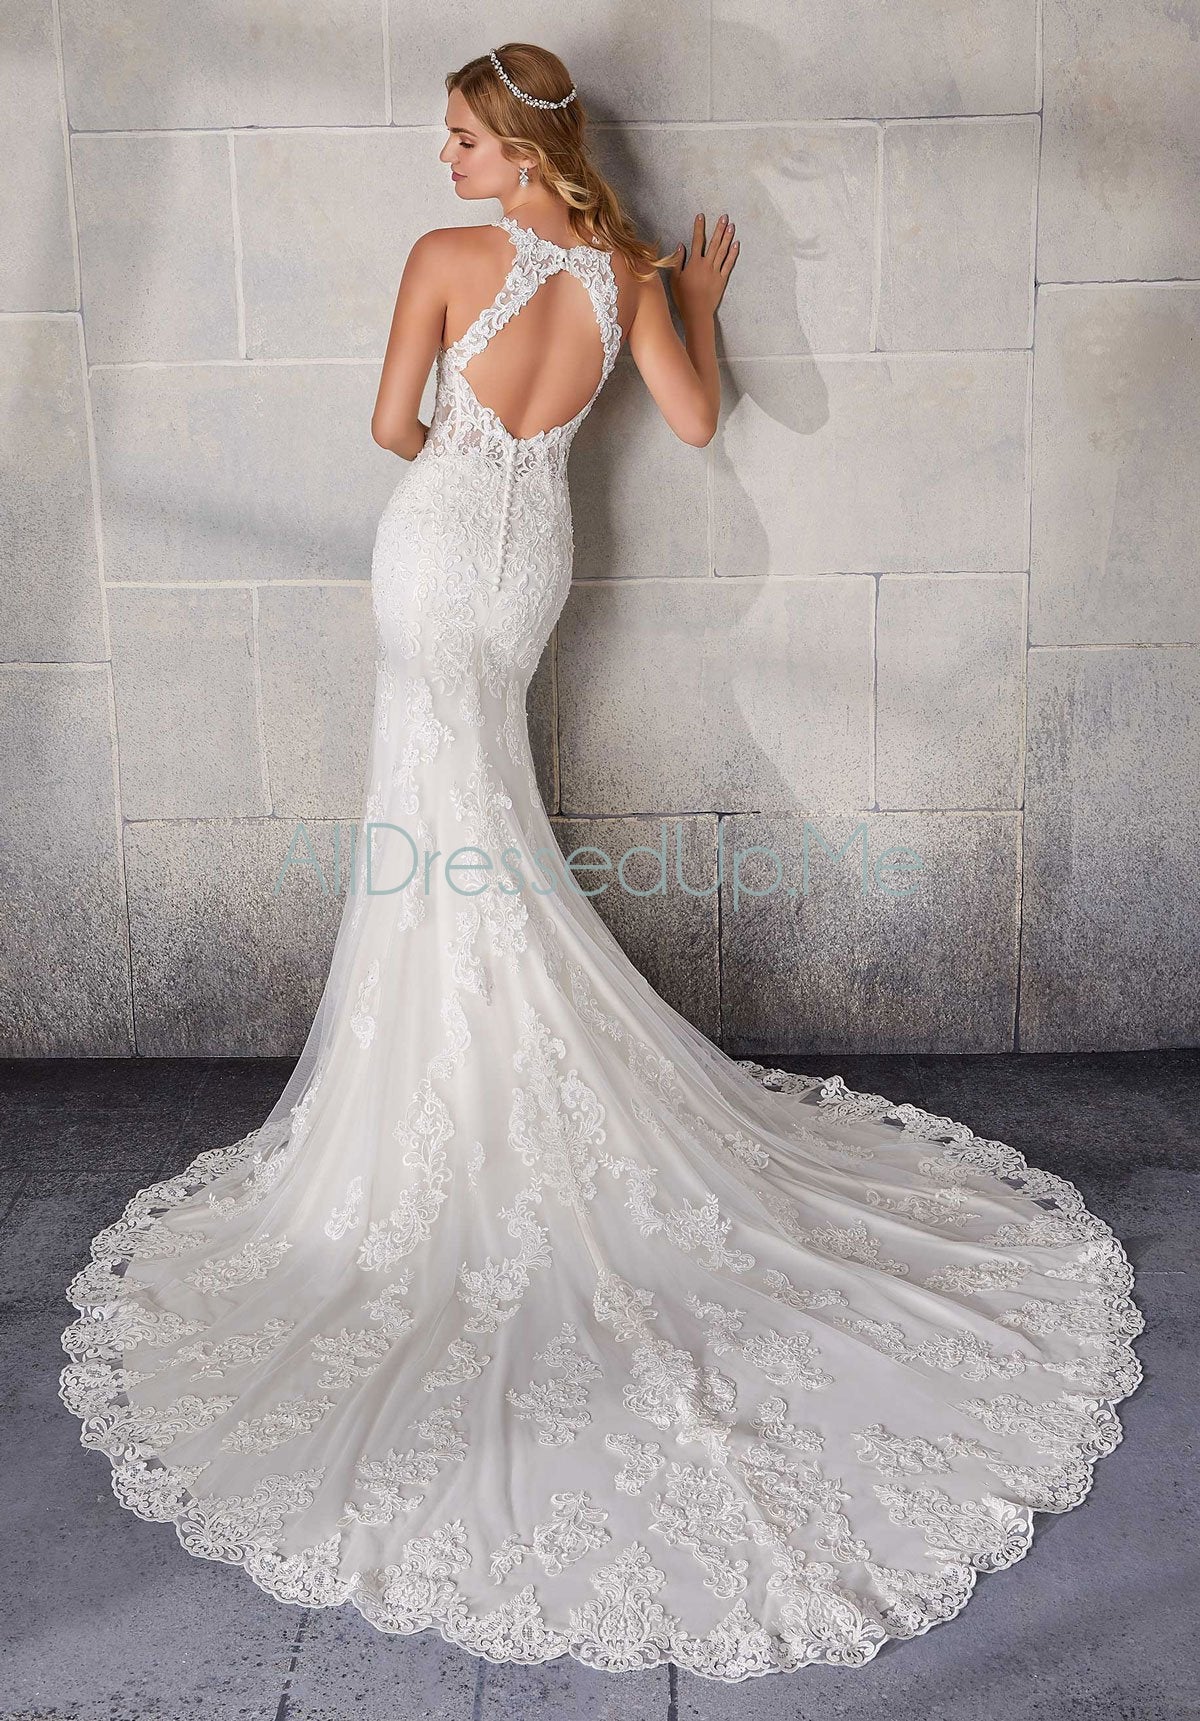 Morilee - Selma - 2137 - Cheron's Bridal, Wedding Gown - Morilee Line - - Wedding Gowns Dresses Chattanooga Hixson Shops Boutiques Tennessee TN Georgia GA MSRP Lowest Prices Sale Discount